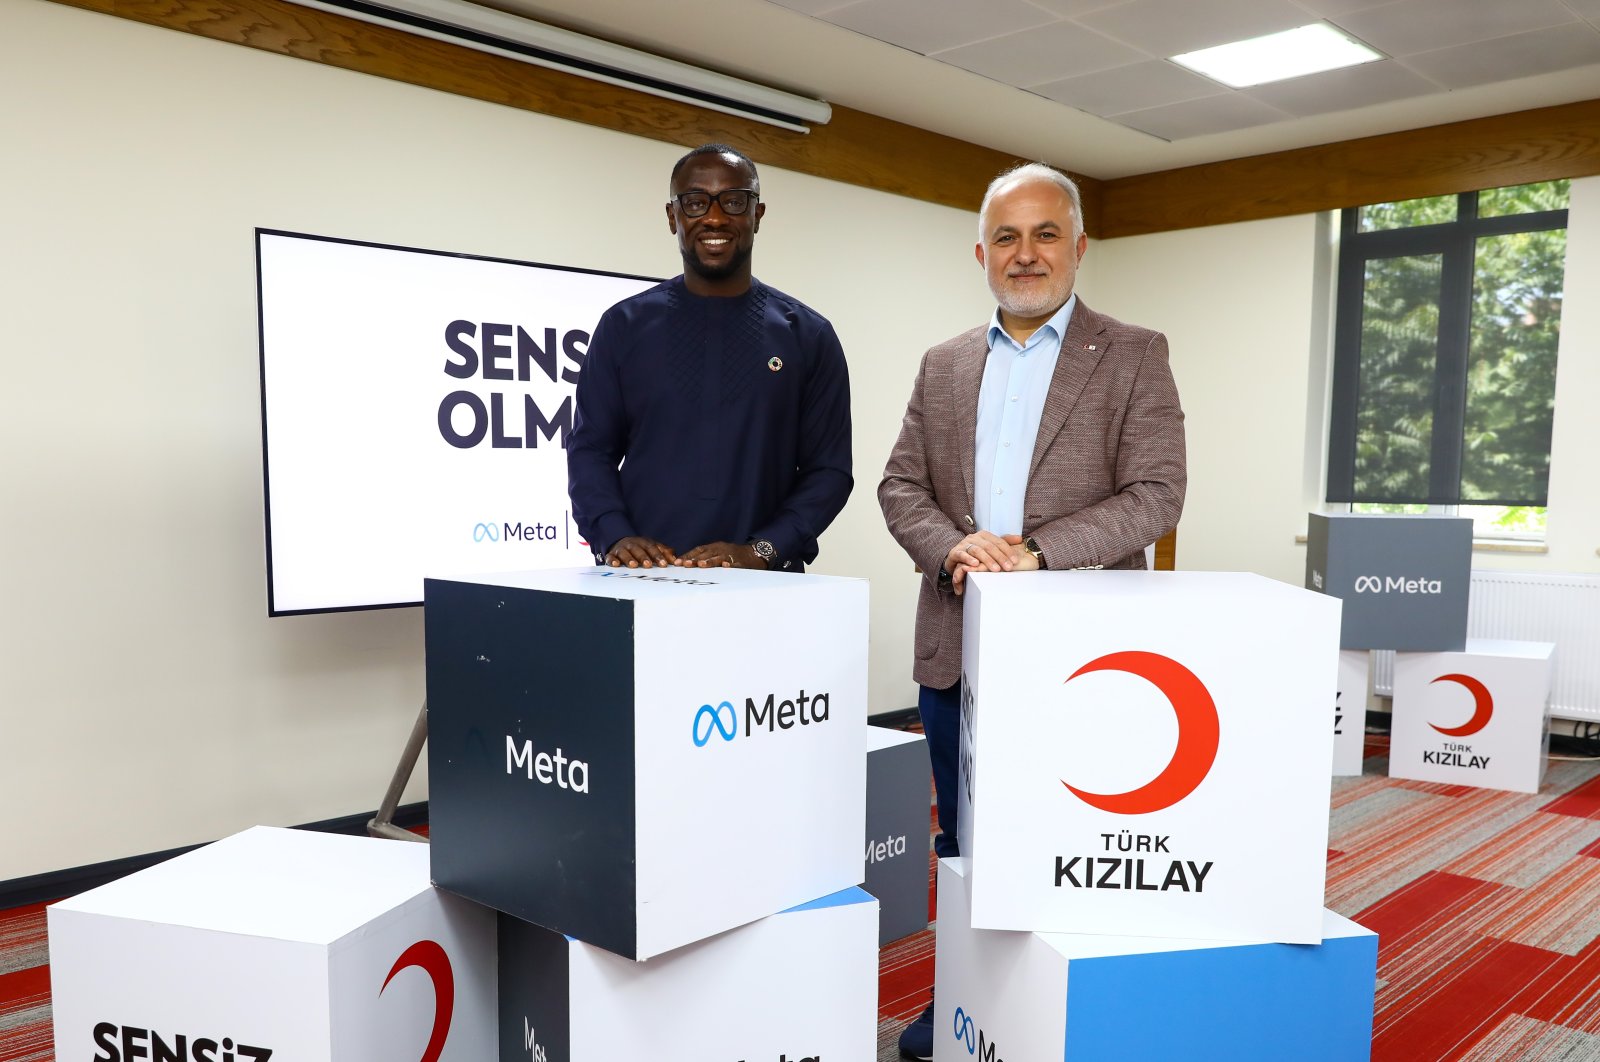 Turkish Red Crescent&#039;s (Kızılay) Dr. Kerem Kınık (R) and Meta executive Kojo Boakye pose at the launch of the tool, Istanbul, June 14, 2022. (Courtesy of the Turkish Red Crescent)